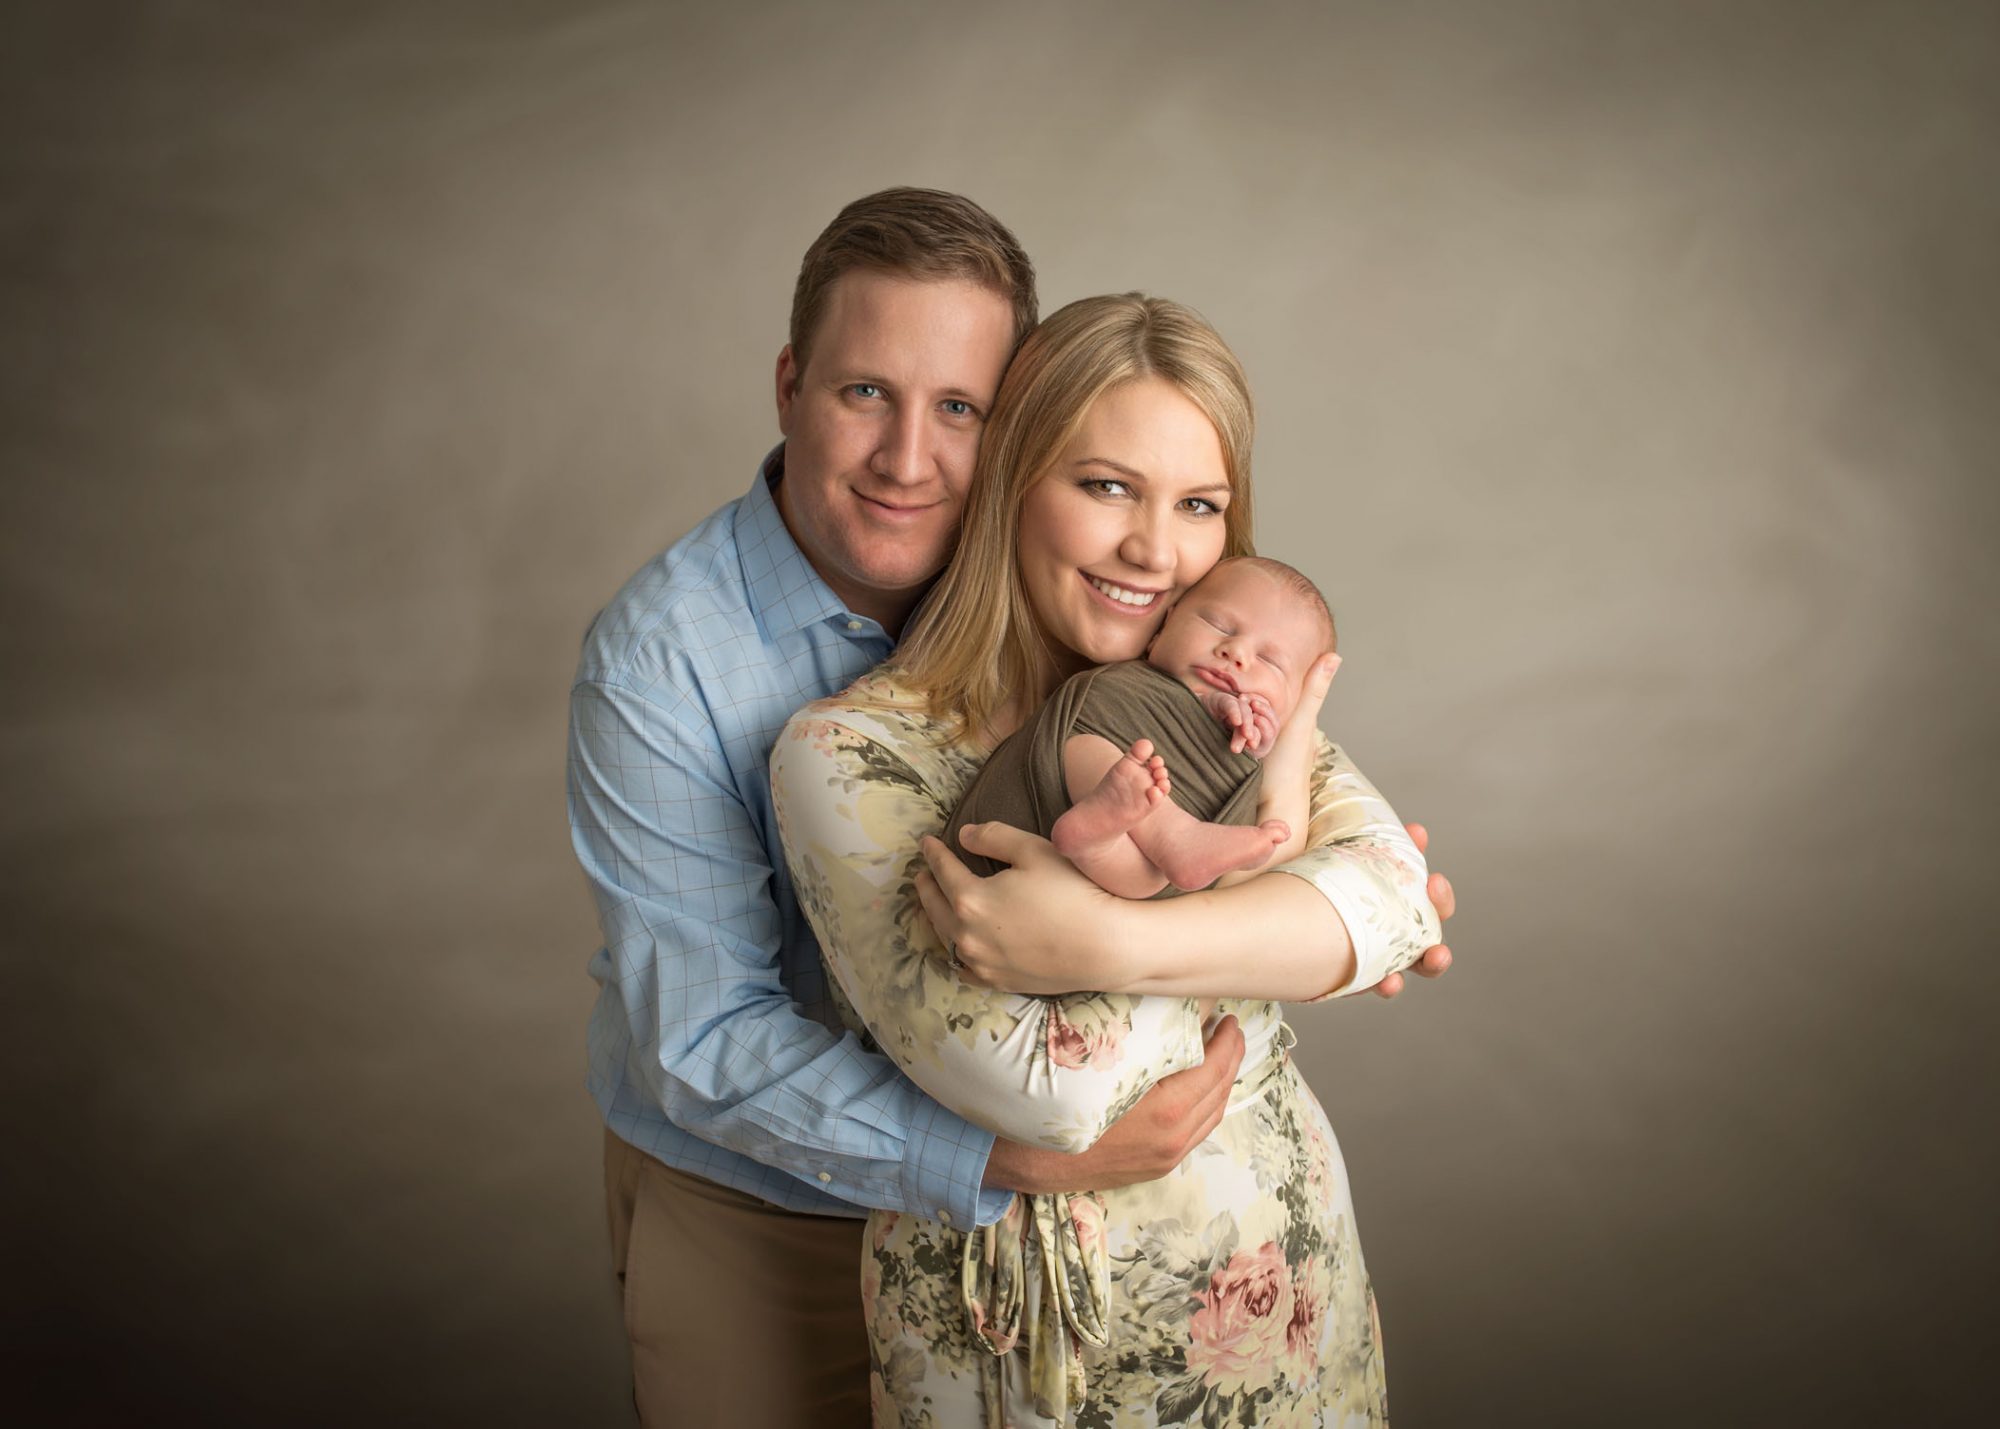 newborn portrait session tips from award winning photographer at one big happy photo